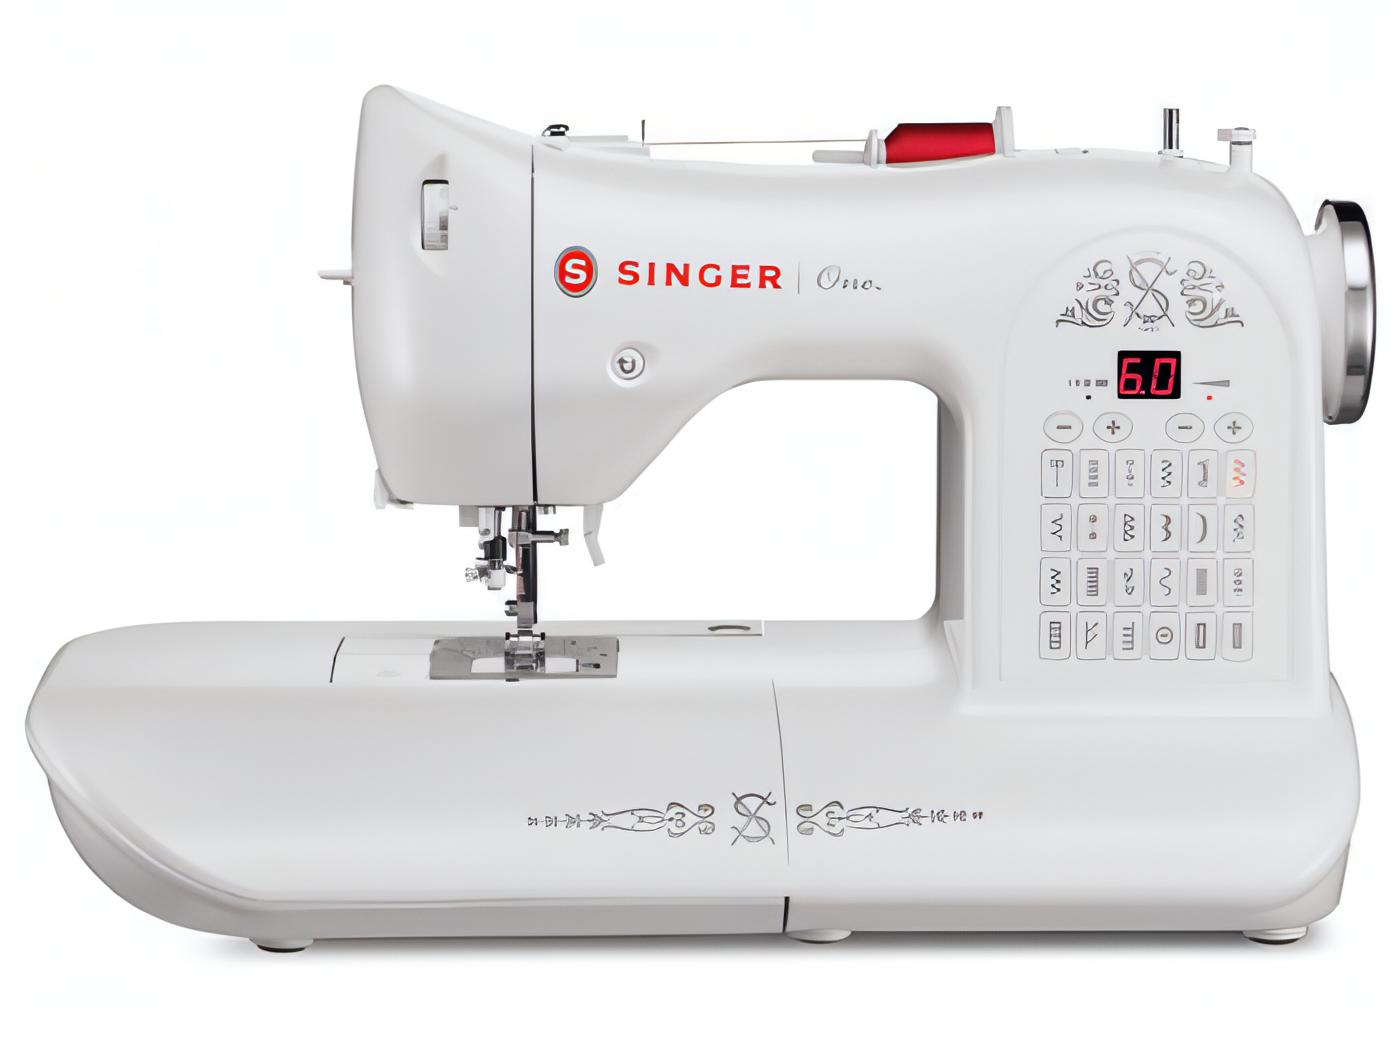 Singer One Sewing Machine - Good as New